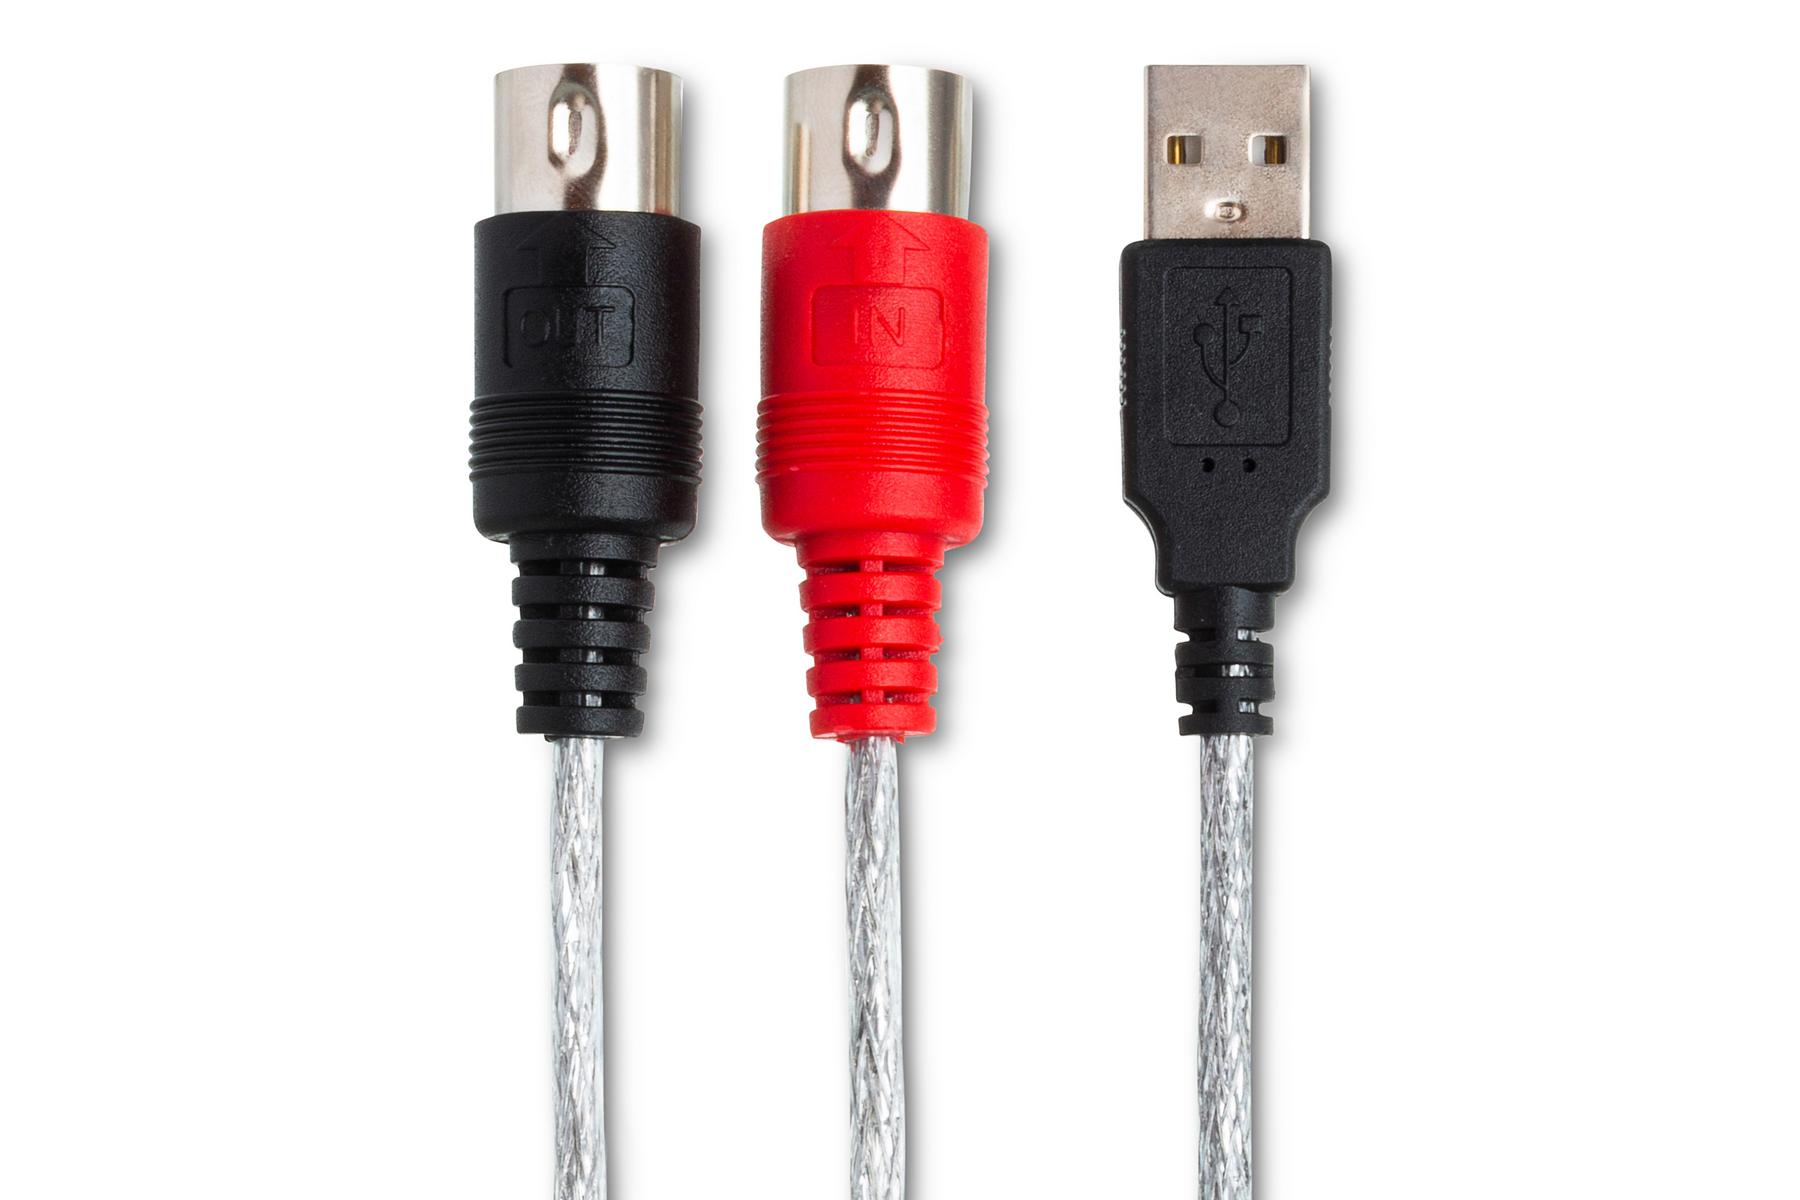 Cable Matters MIDI to USB Cable 6.6 ft / 2m (USB MIDI Cable, MIDI to USB C  Cable) in Black, Does NOT Support SysEx